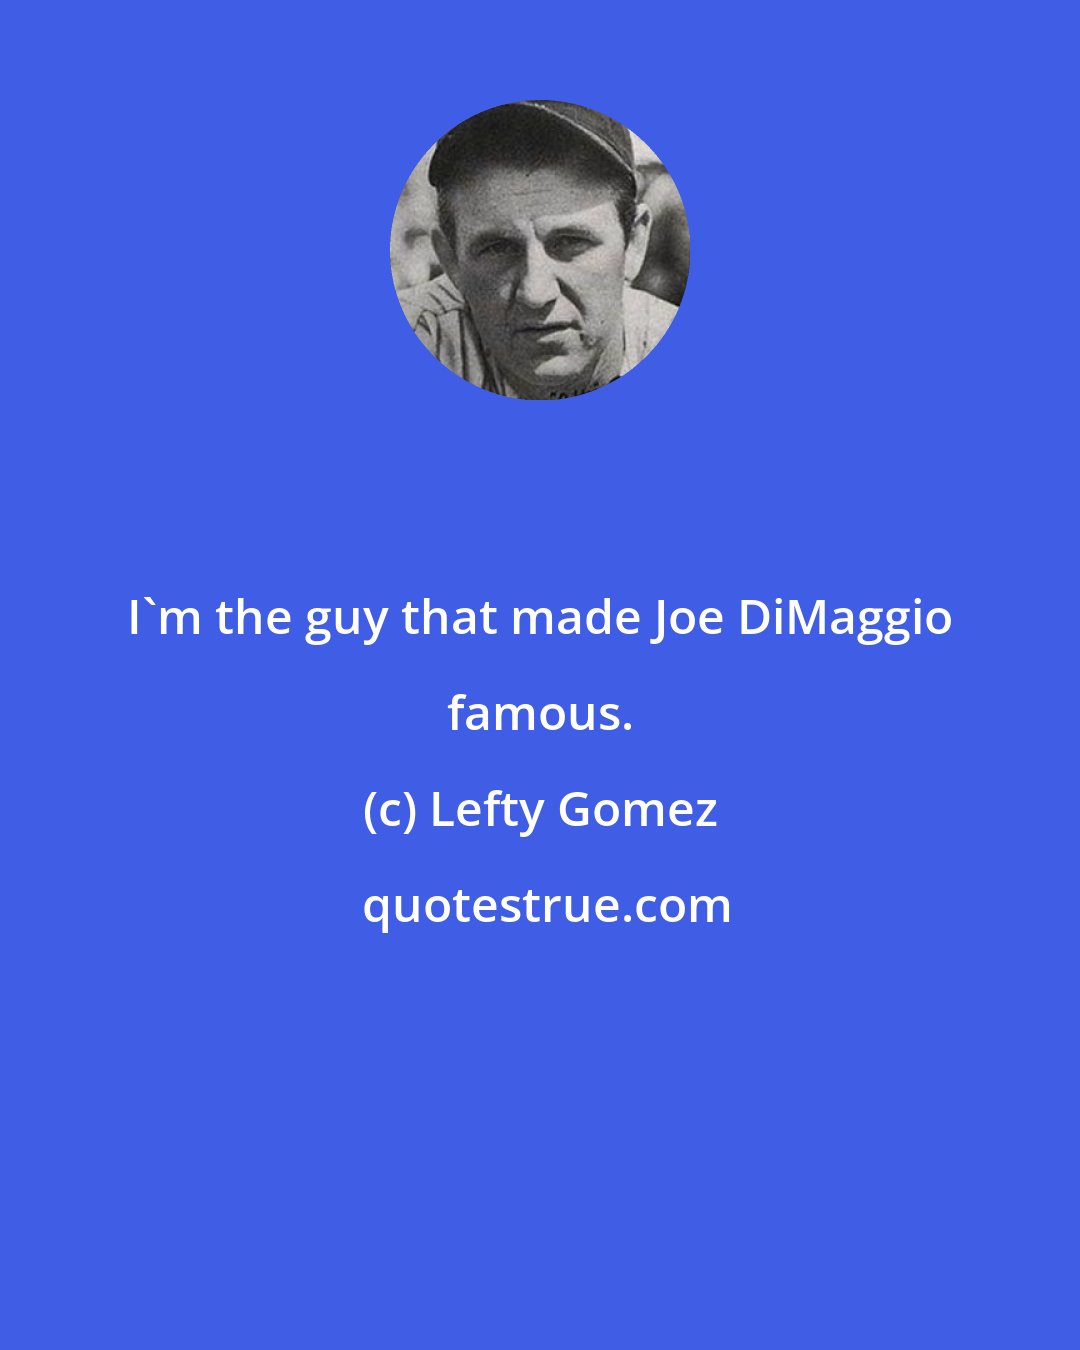 Lefty Gomez: I'm the guy that made Joe DiMaggio famous.